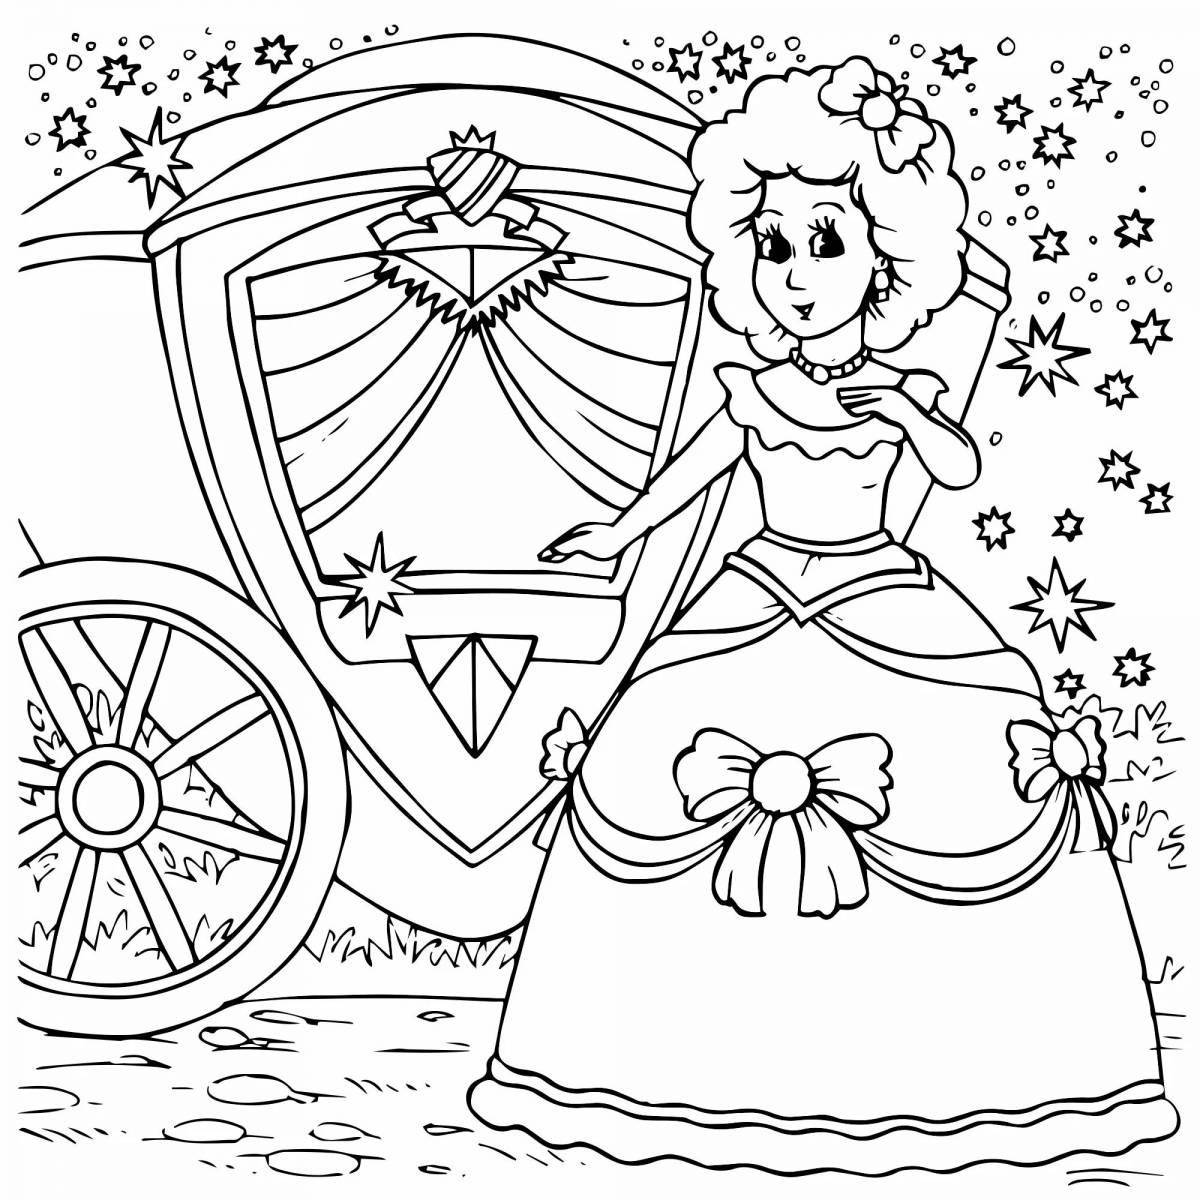 Cinderella's shiny carriage coloring page